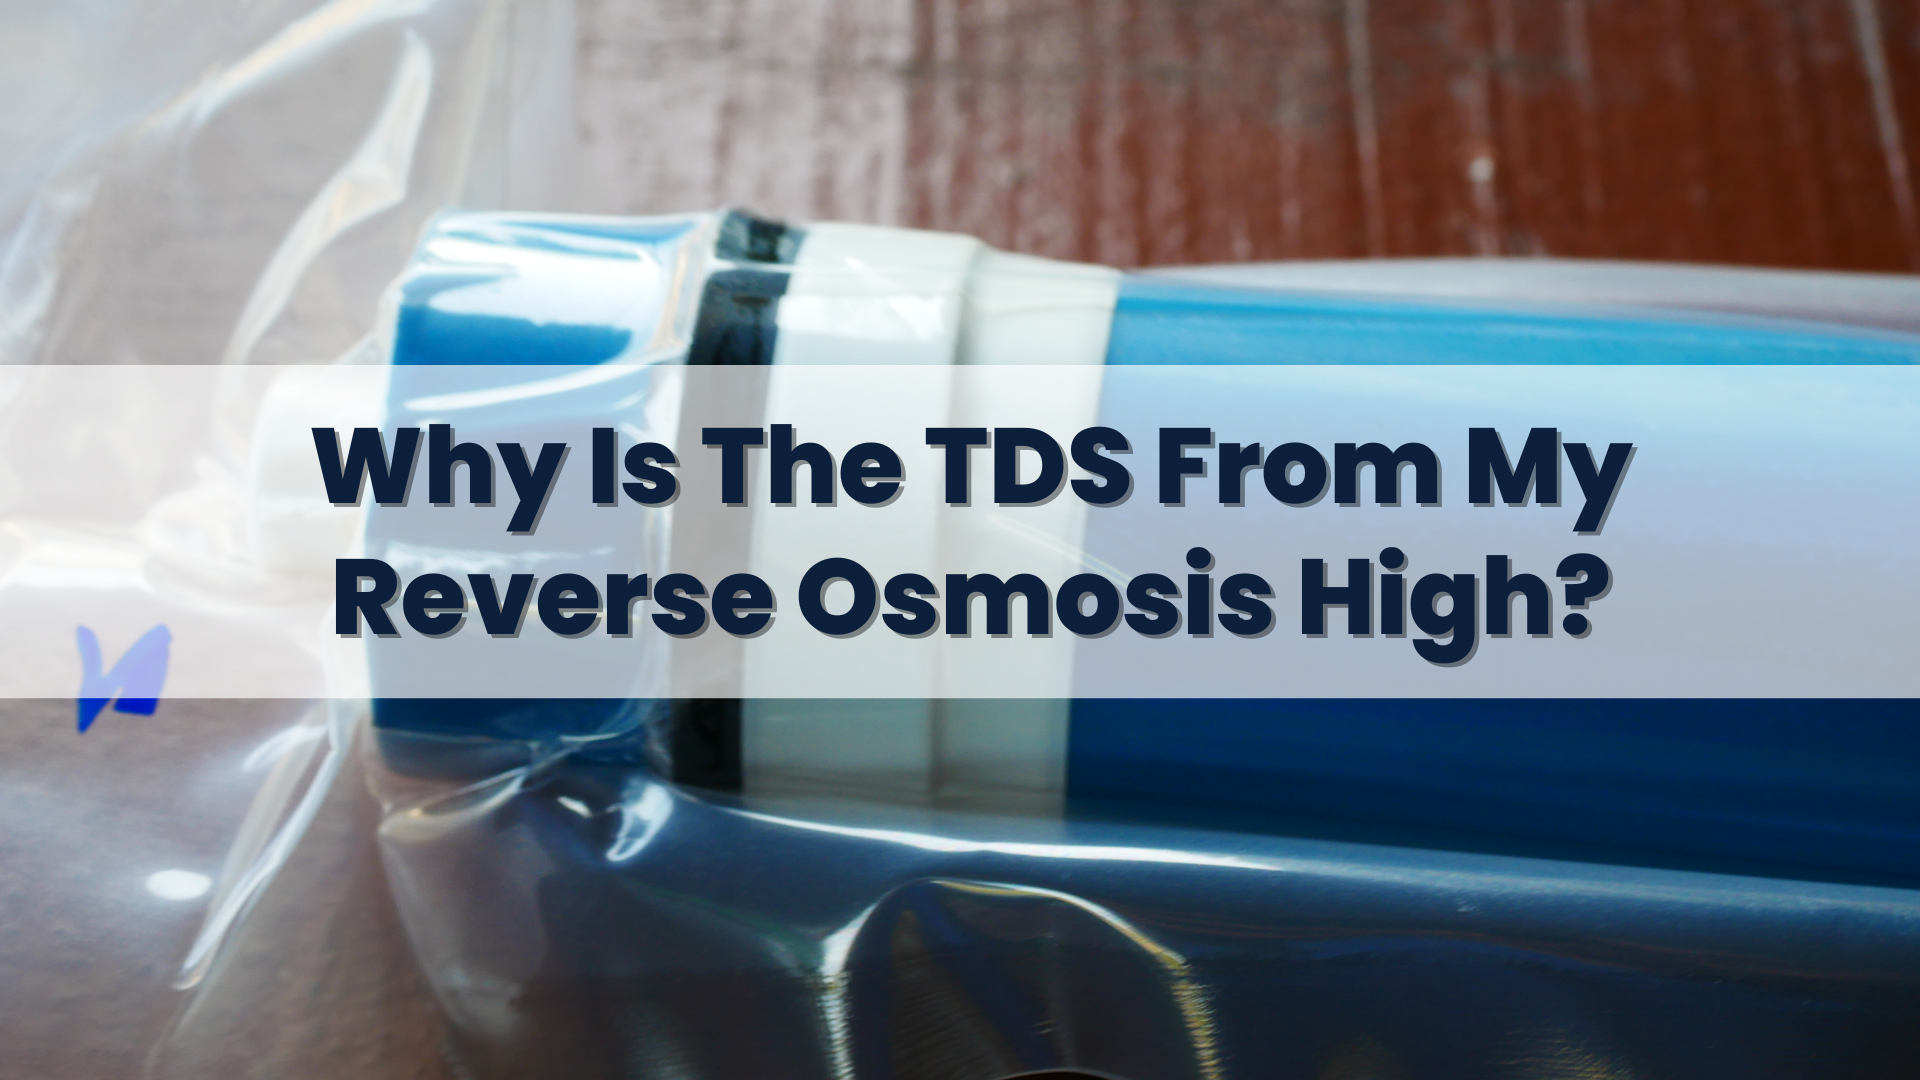 Why Is The TDS From My Reverse Osmosis High